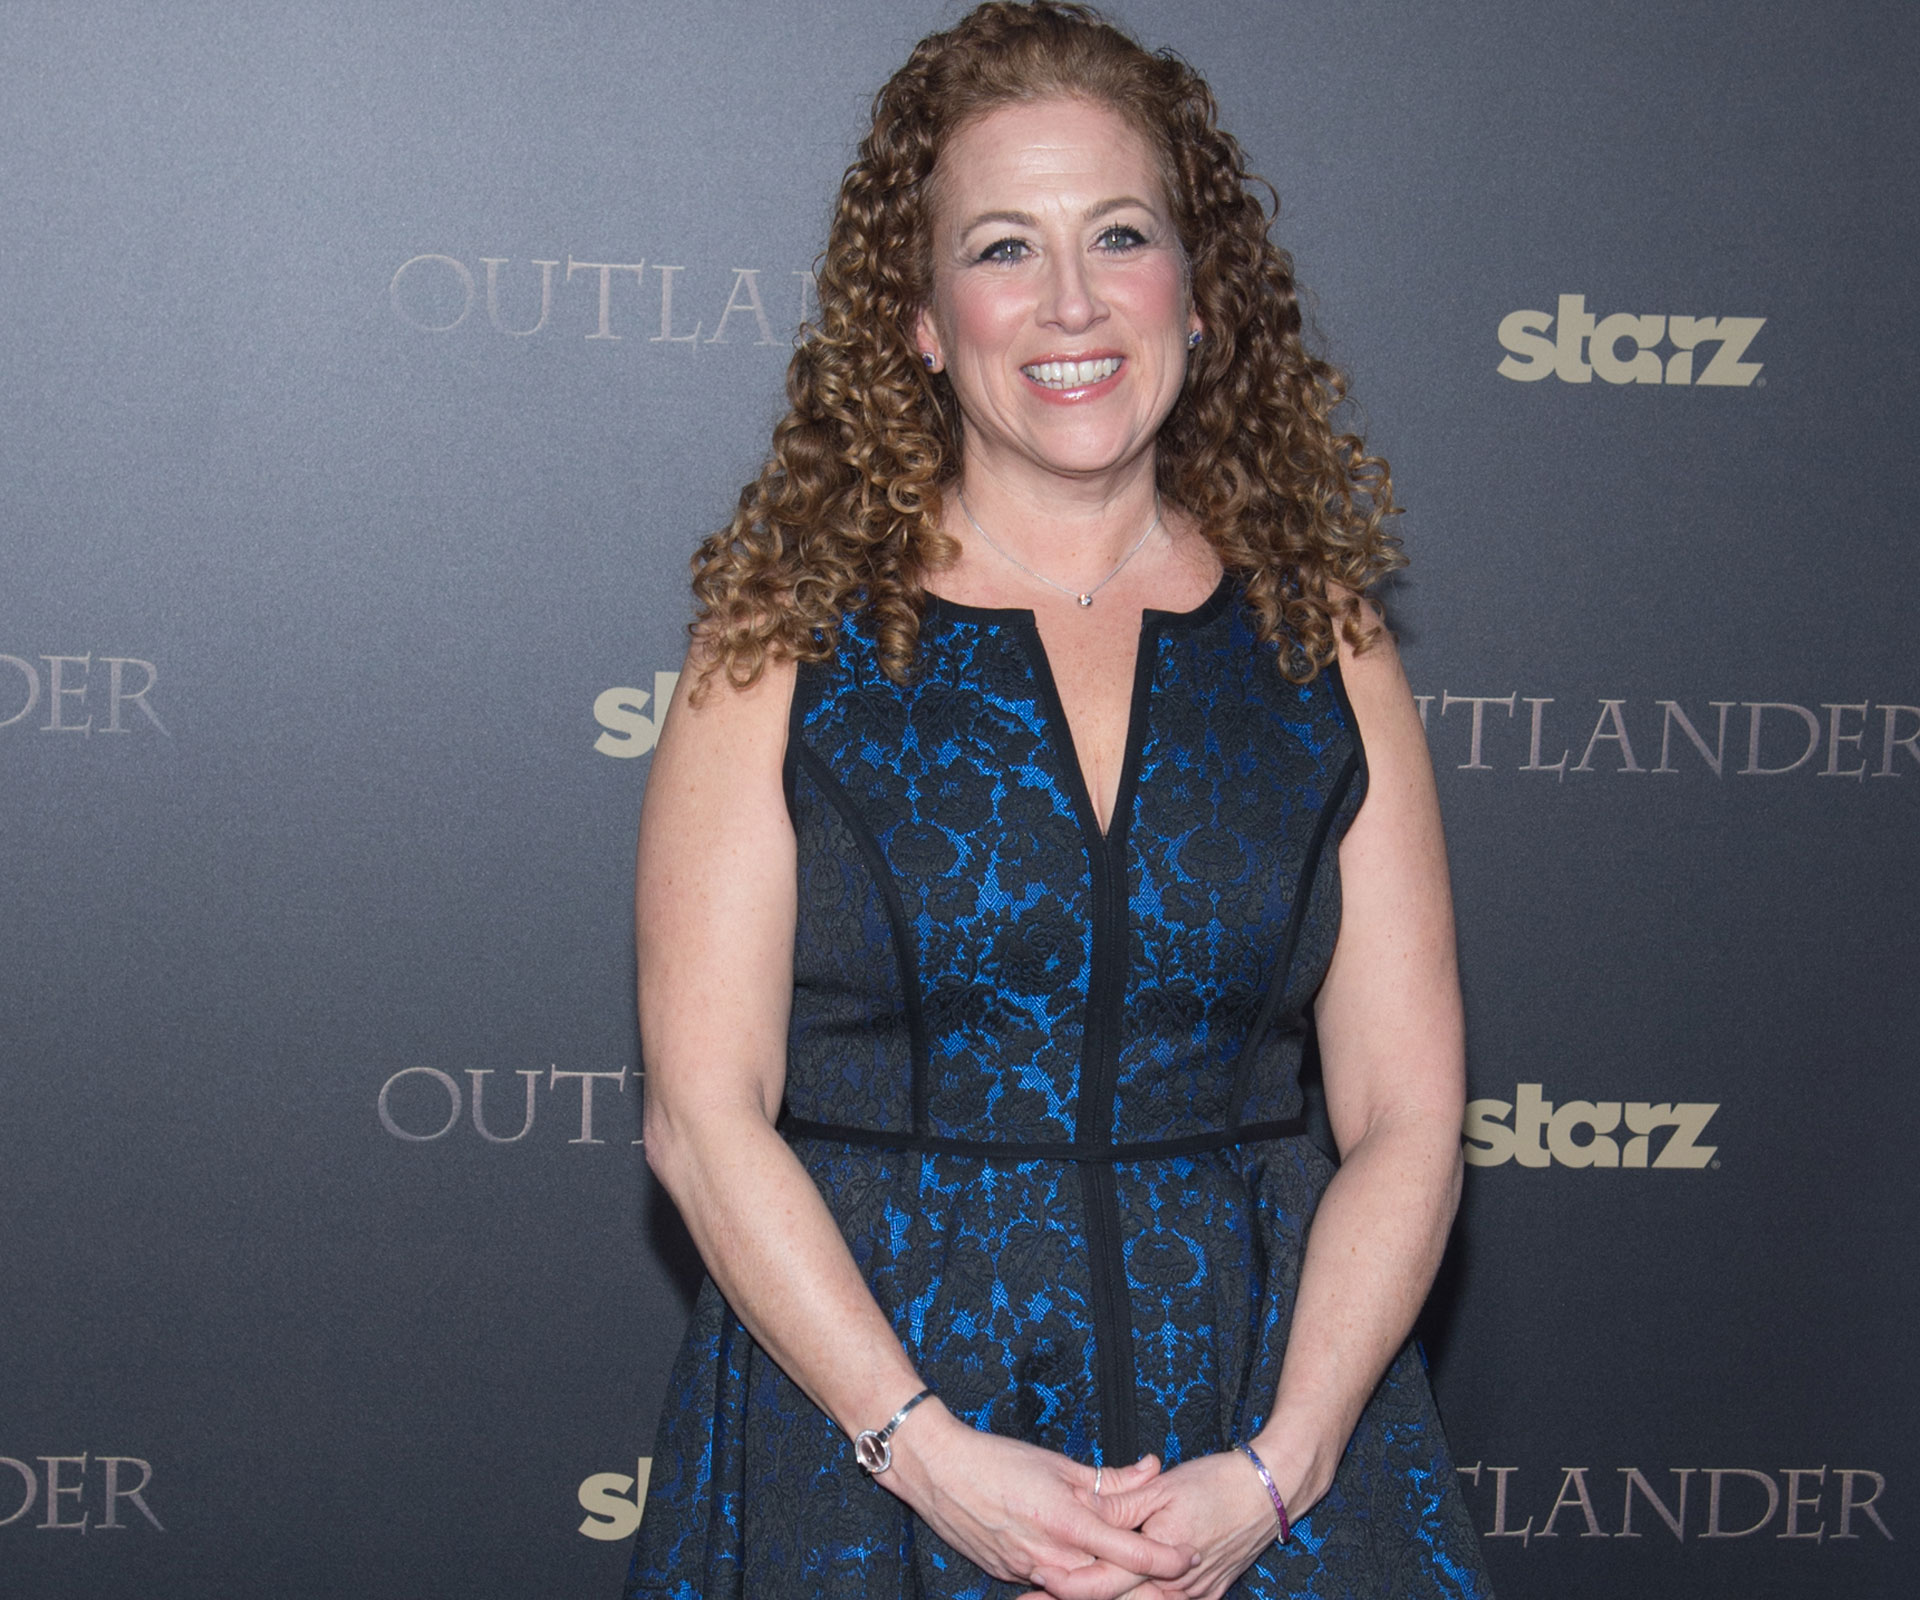 Attention bookclubs: Jodi Picoult’s new tome is about to drop